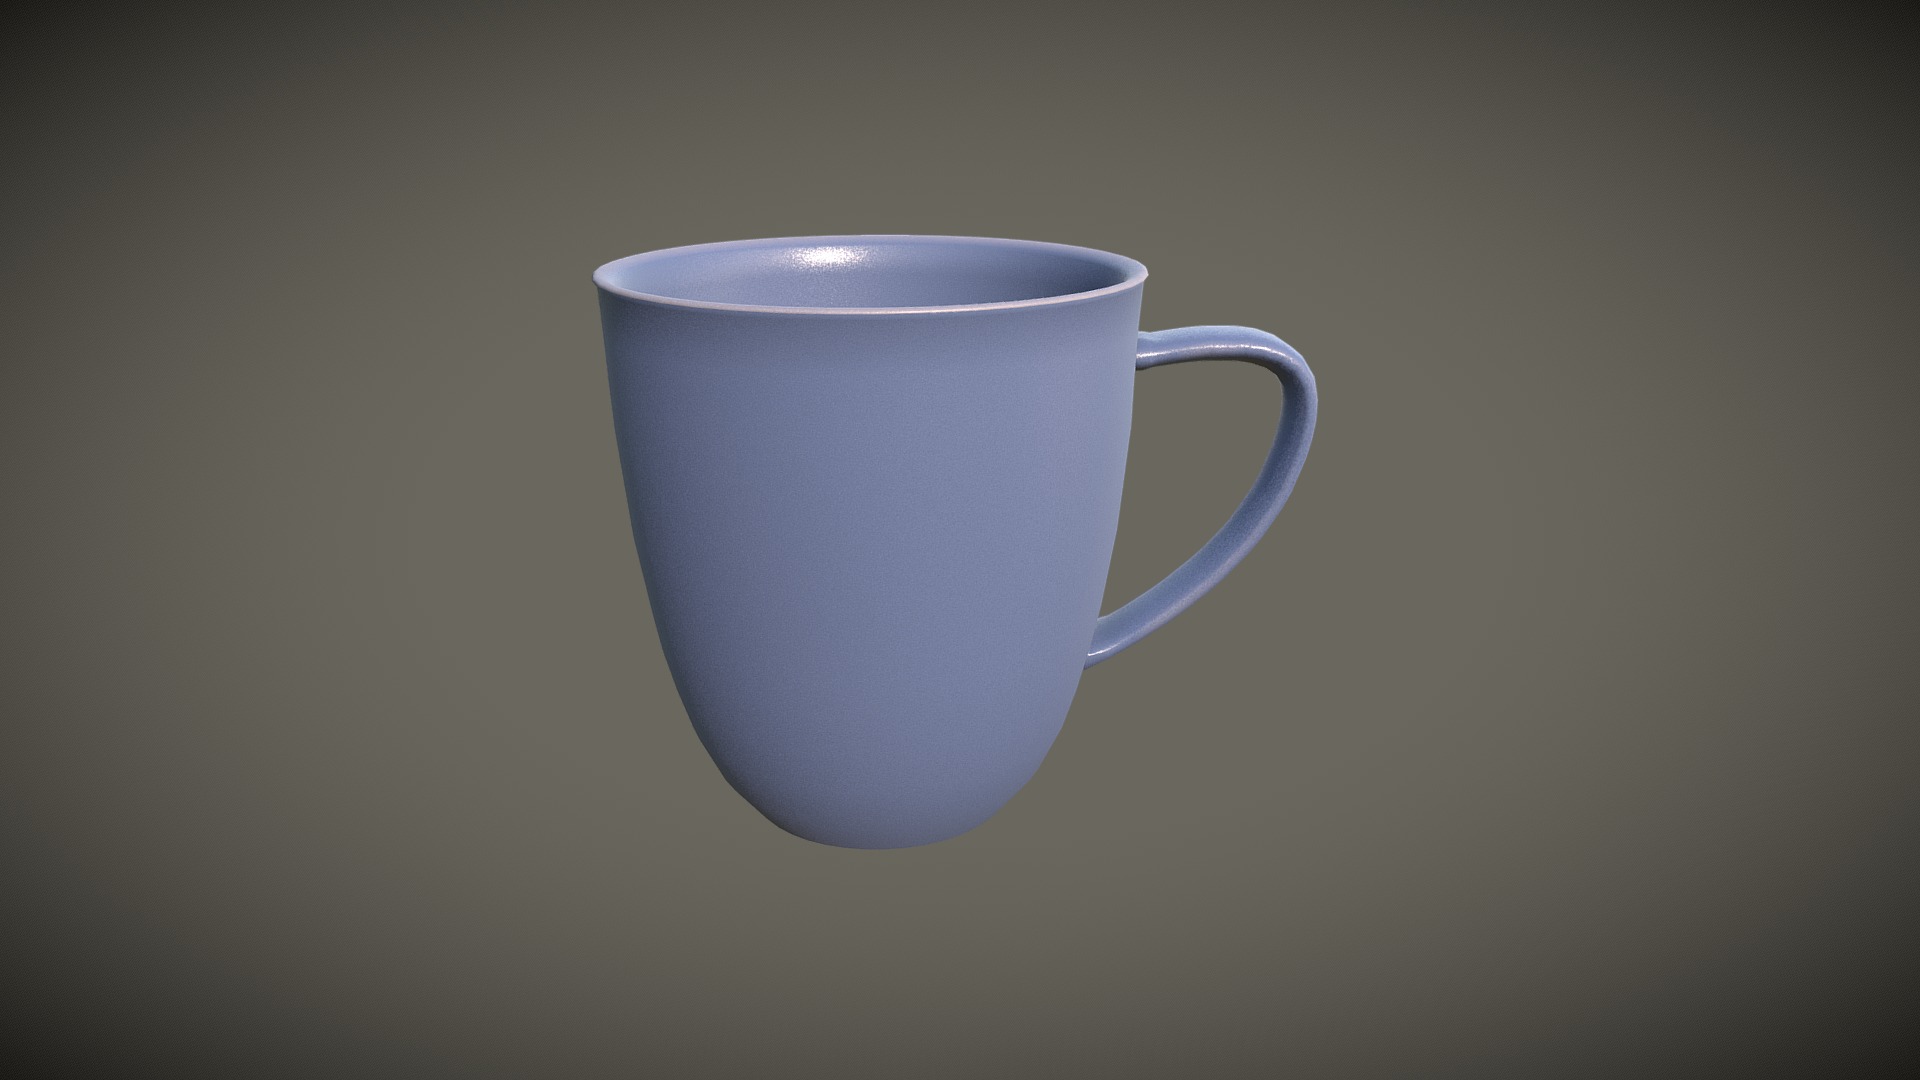 Model of a classic glazed stoneware coffee mug with 2K PBR-textures built to real-world scale. The model combines realistic textures with a moderate polygon count.

The model was created using Blender and Substance Painter. The model is UV-mapped and has two materials, one for the glazed body and one for the unglazed bottom part.

The zip-file &ldquo;Stoneware coffee mug.zip